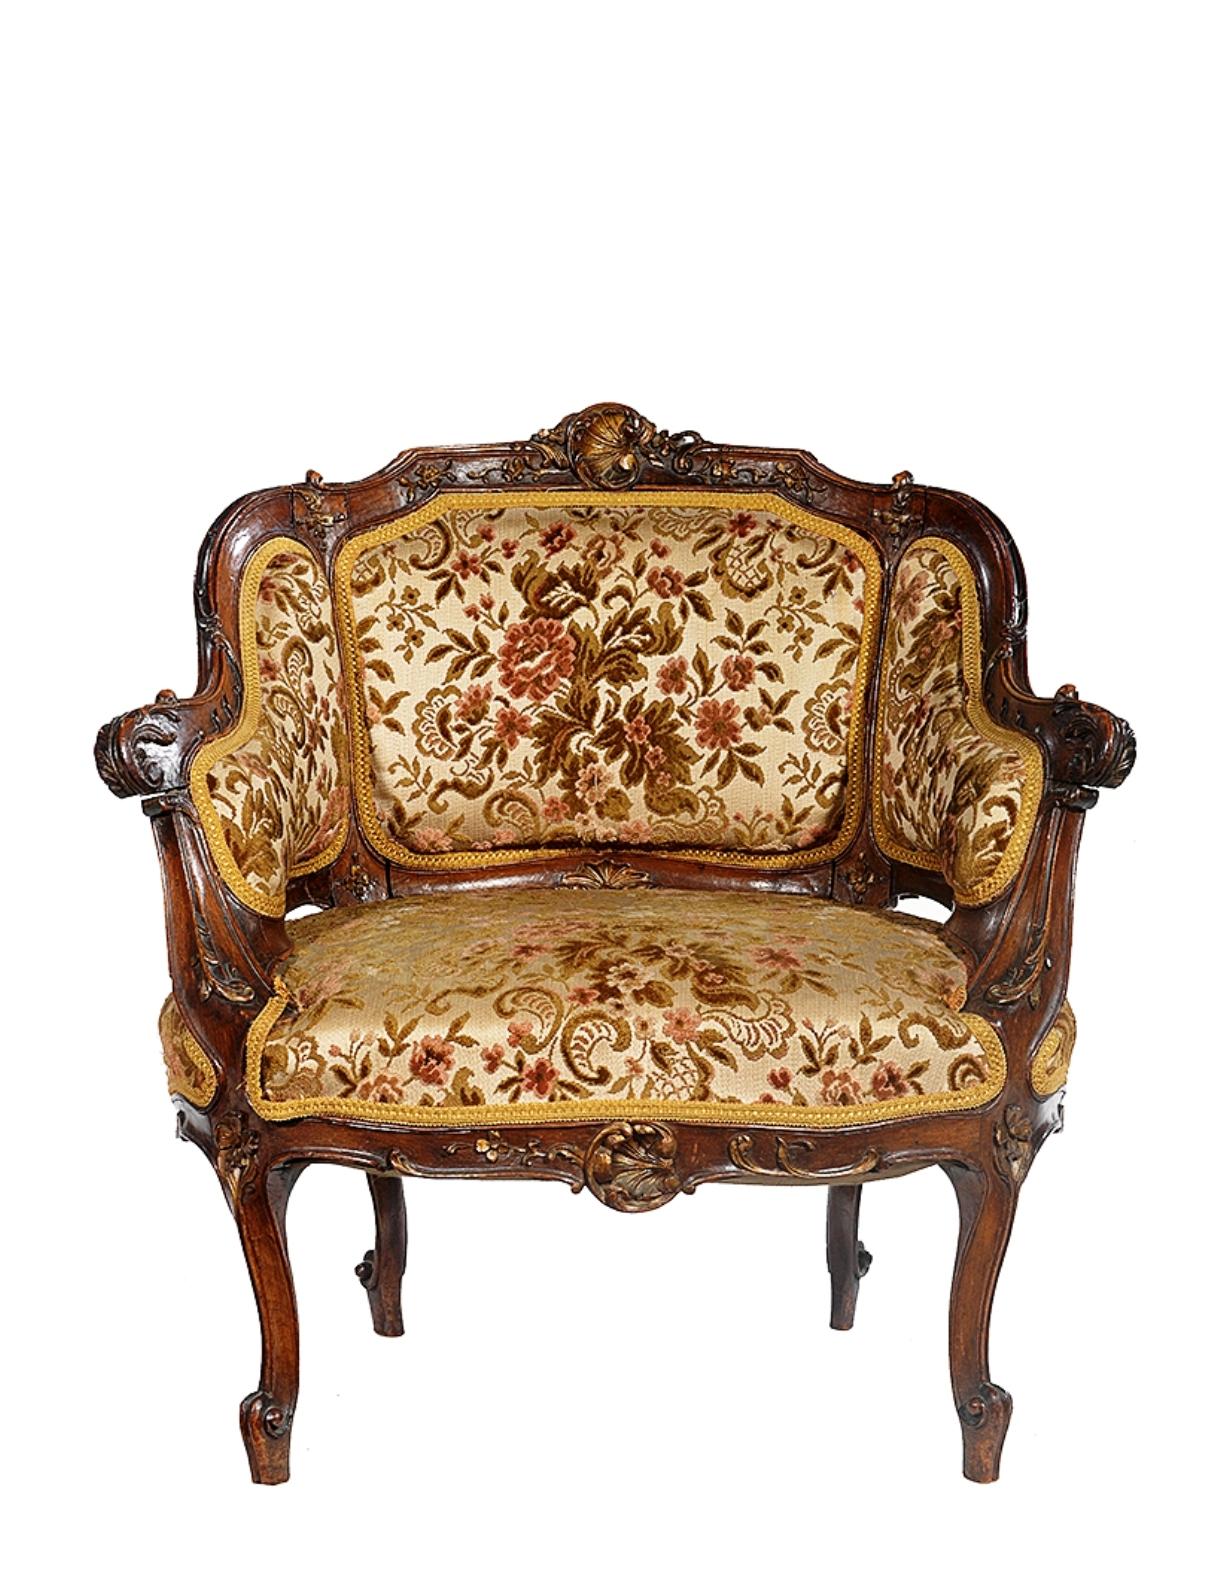 Late 19th Century French Louis XV Style Walnut Framed Petite Bergère Chair For Sale 4